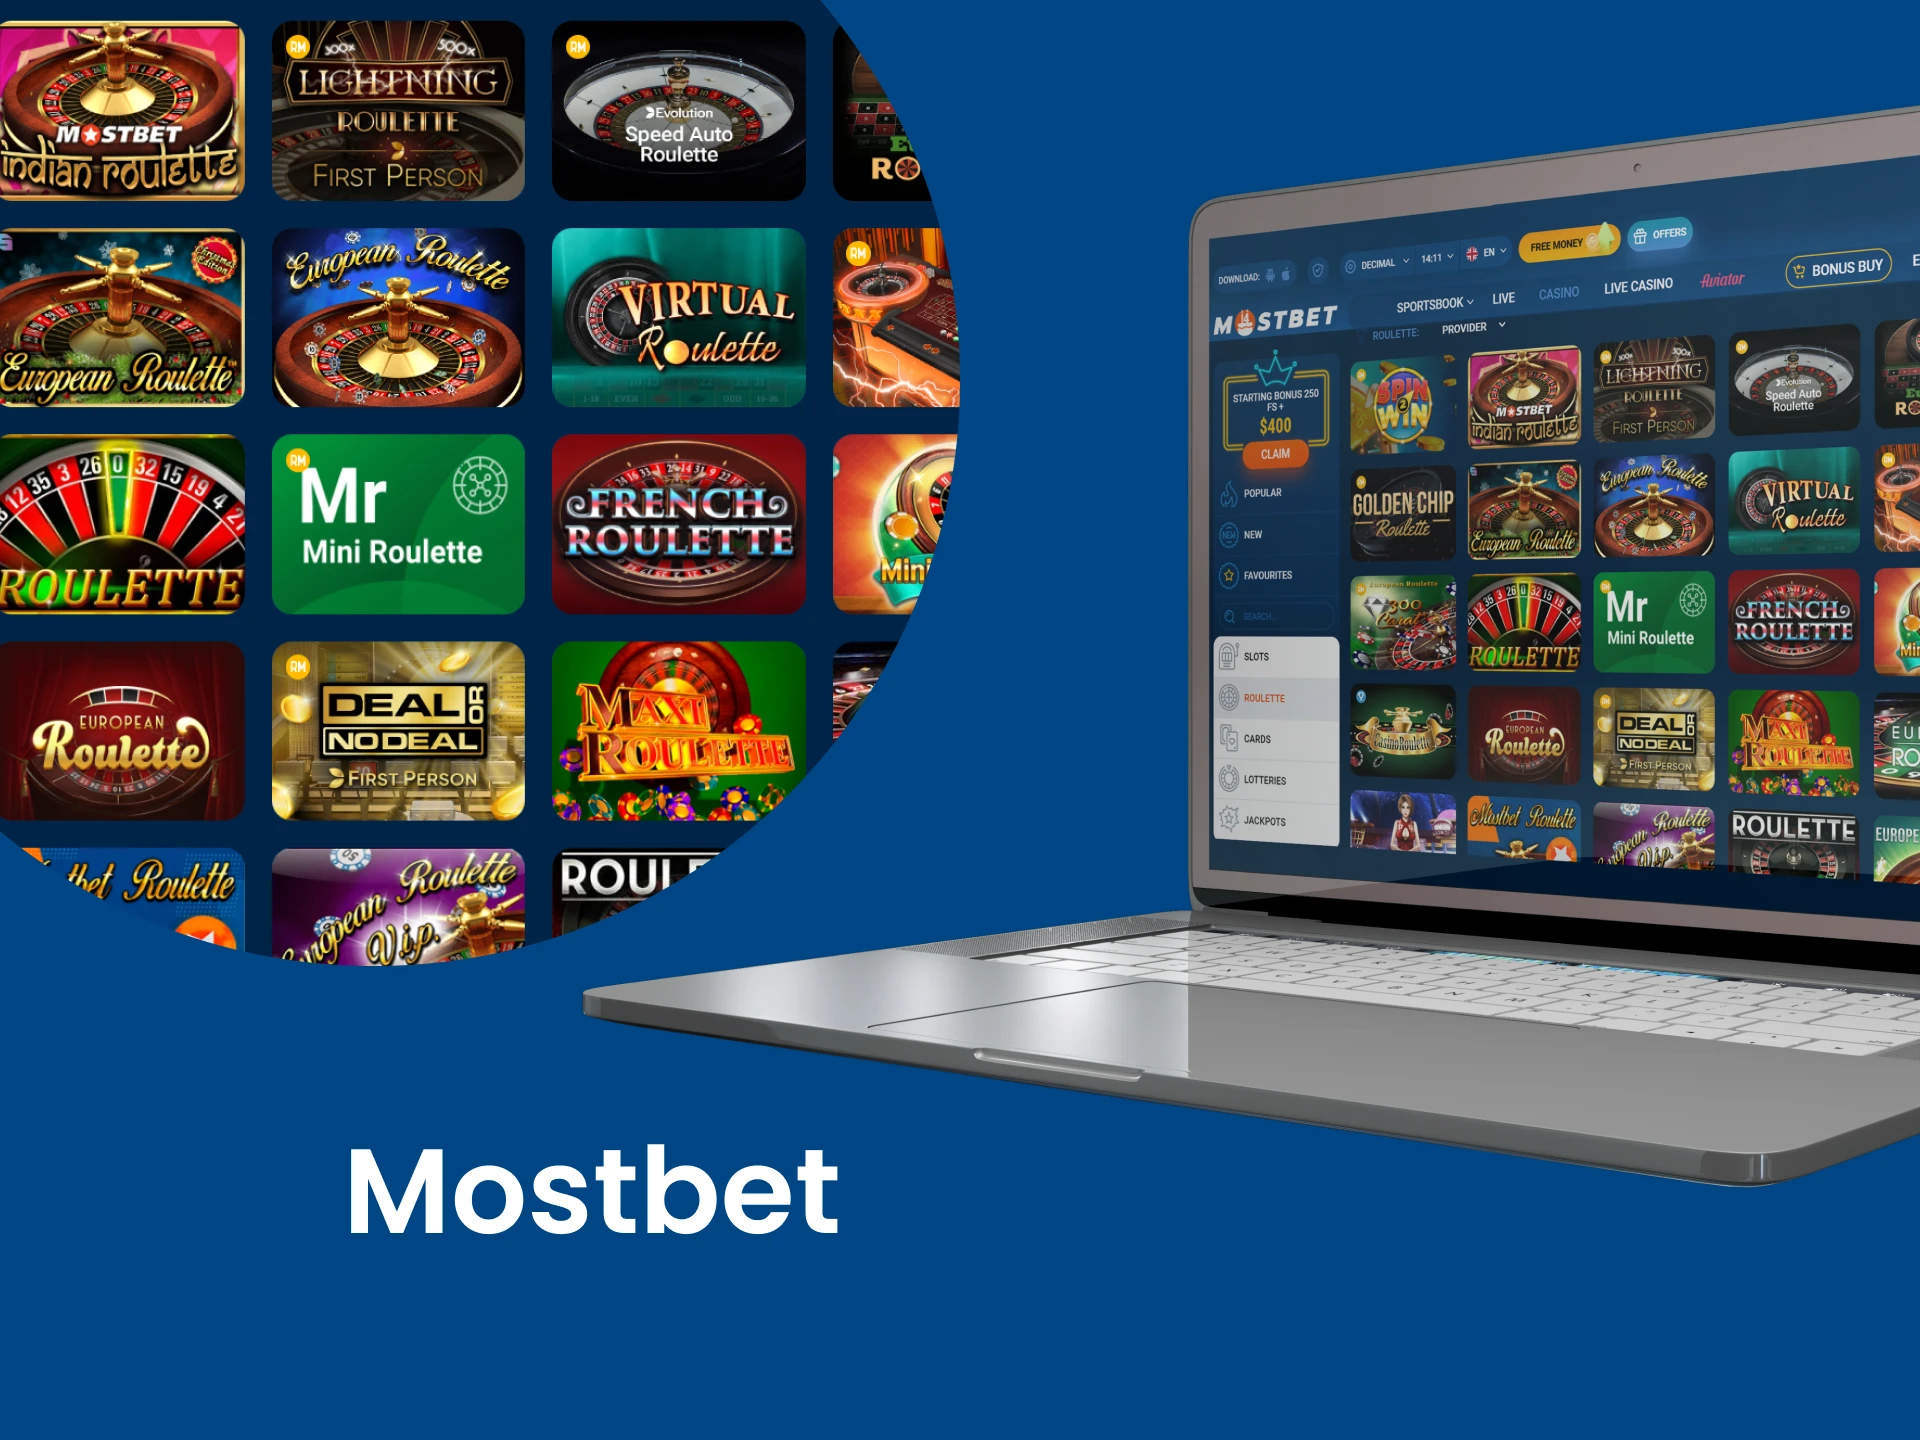 For roulette games, choose Mostbet.